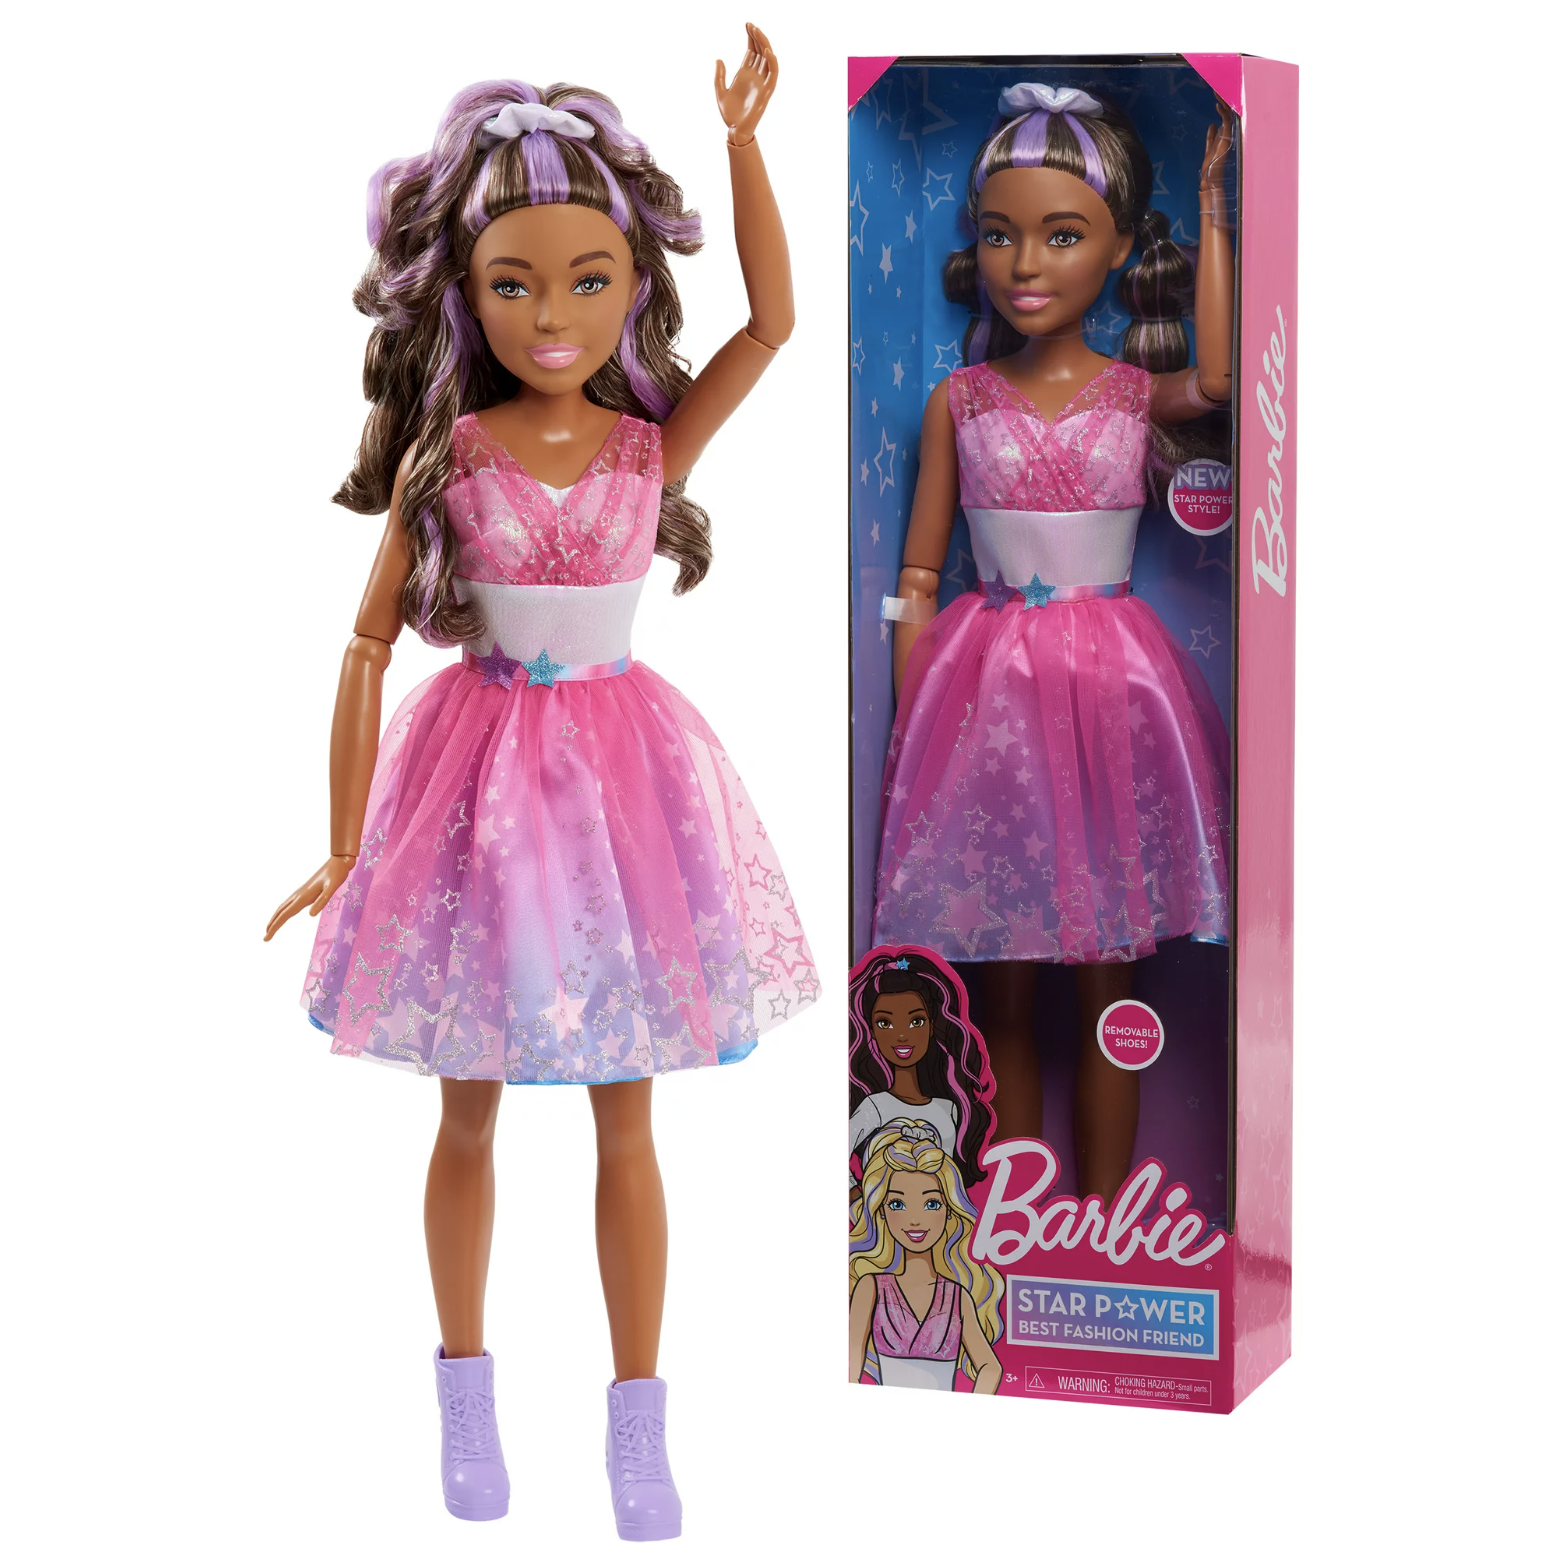 Barbie with purple hair streaks, starry dress, and removable shoes